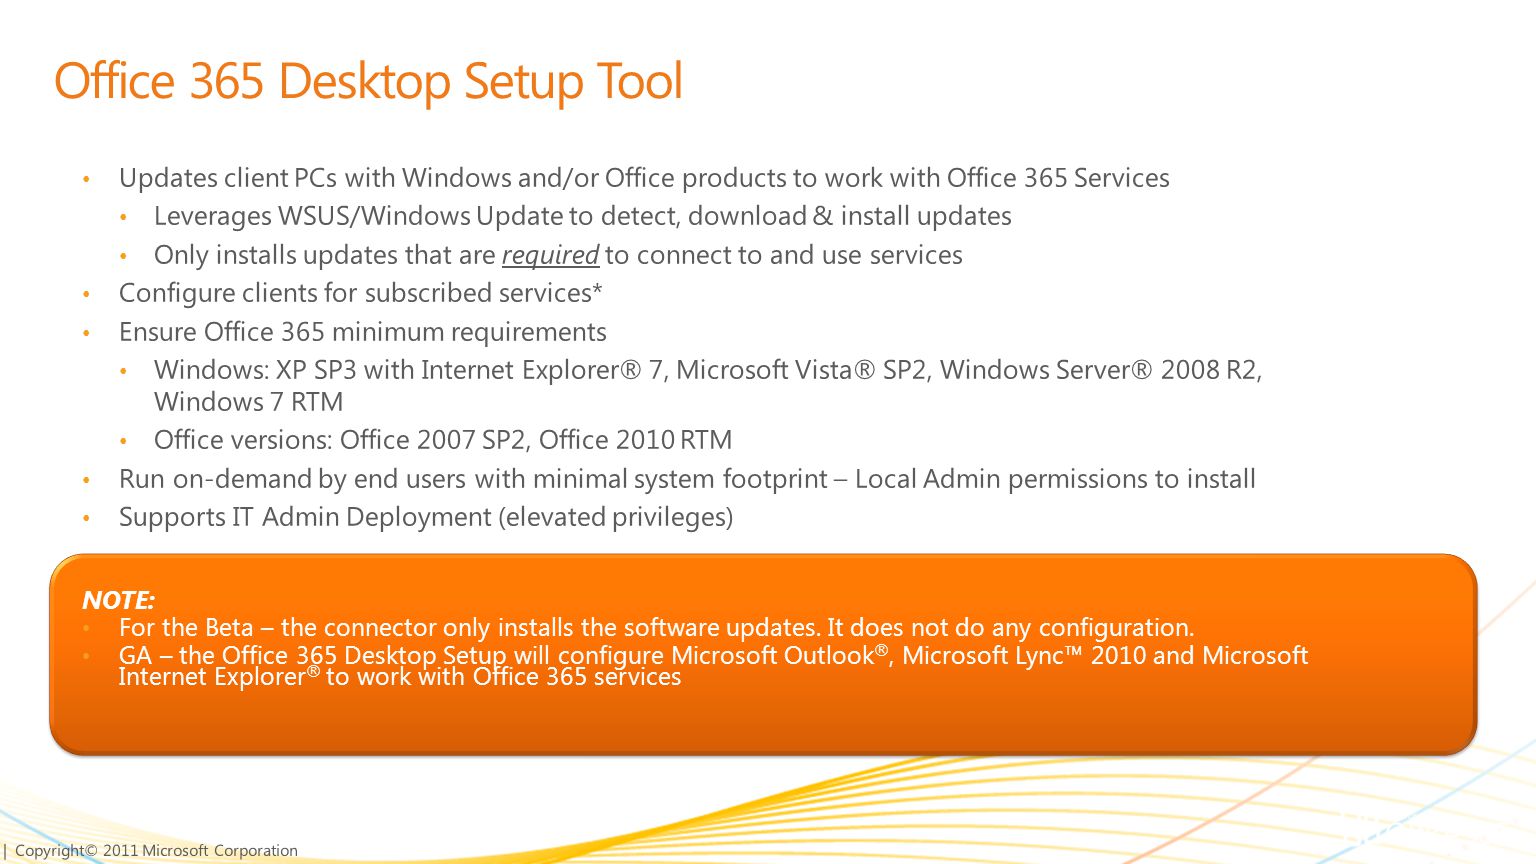 | Copyright© 2011 Microsoft Corporation Updates client PCs with Windows and/or Office products to work with Office 365 Services Leverages WSUS/Windows Update to detect, download & install updates Only installs updates that are required to connect to and use services Configure clients for subscribed services* Ensure Office 365 minimum requirements Windows: XP SP3 with Internet Explorer® 7, Microsoft Vista® SP2, Windows Server® 2008 R2, Windows 7 RTM Office versions: Office 2007 SP2, Office 2010 RTM Run on-demand by end users with minimal system footprint – Local Admin permissions to install Supports IT Admin Deployment (elevated privileges) NOTE: For the Beta – the connector only installs the software updates.